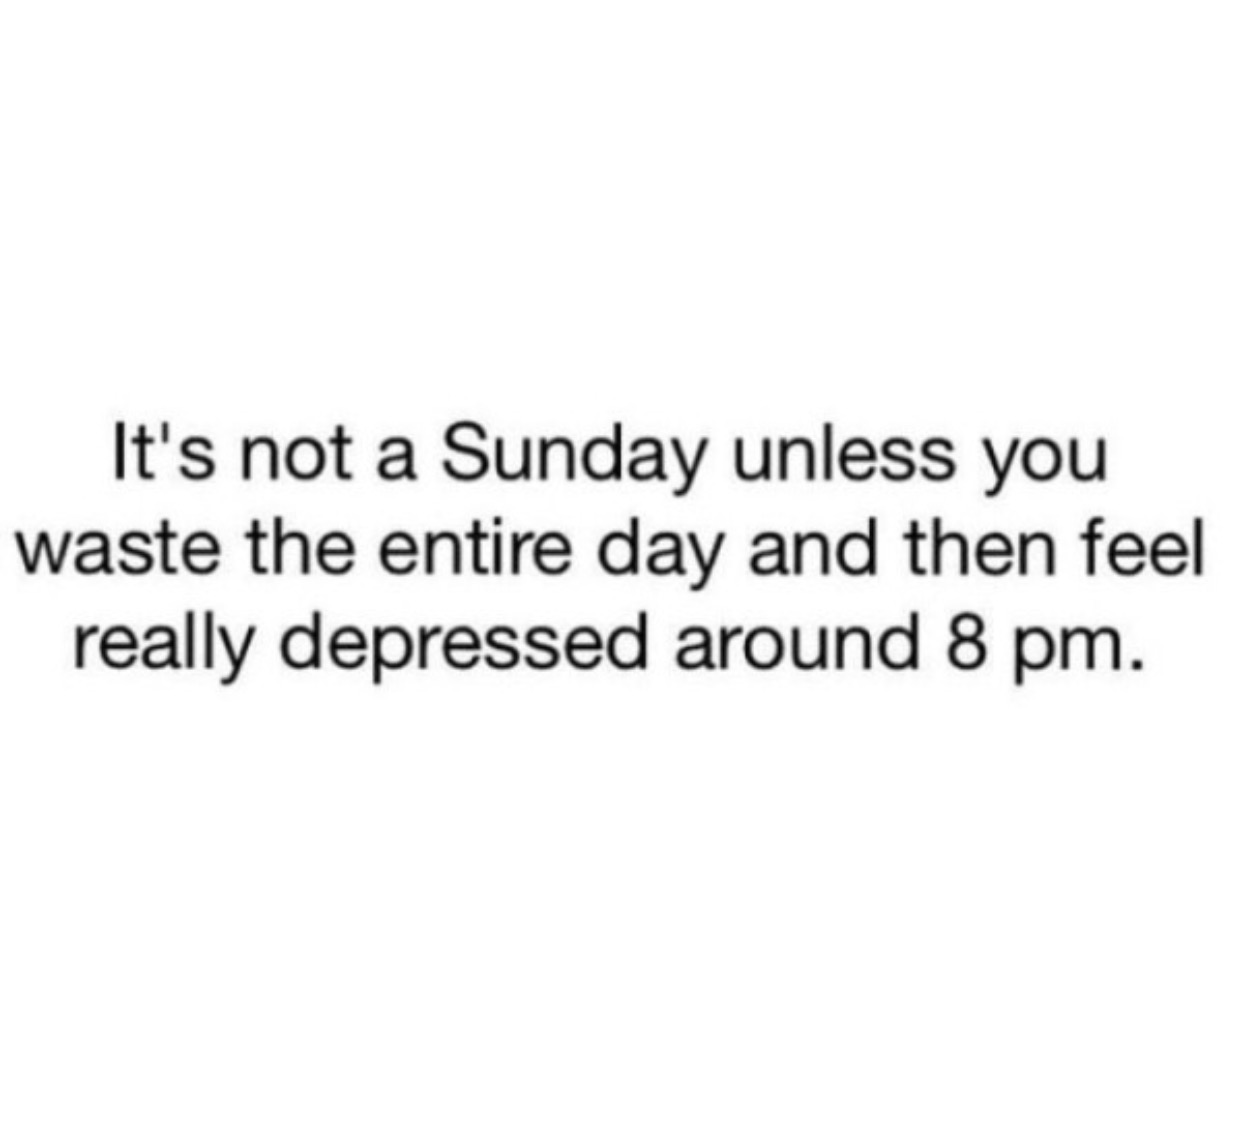 document - It's not a Sunday unless you waste the entire day and then feel really depressed around 8 pm.